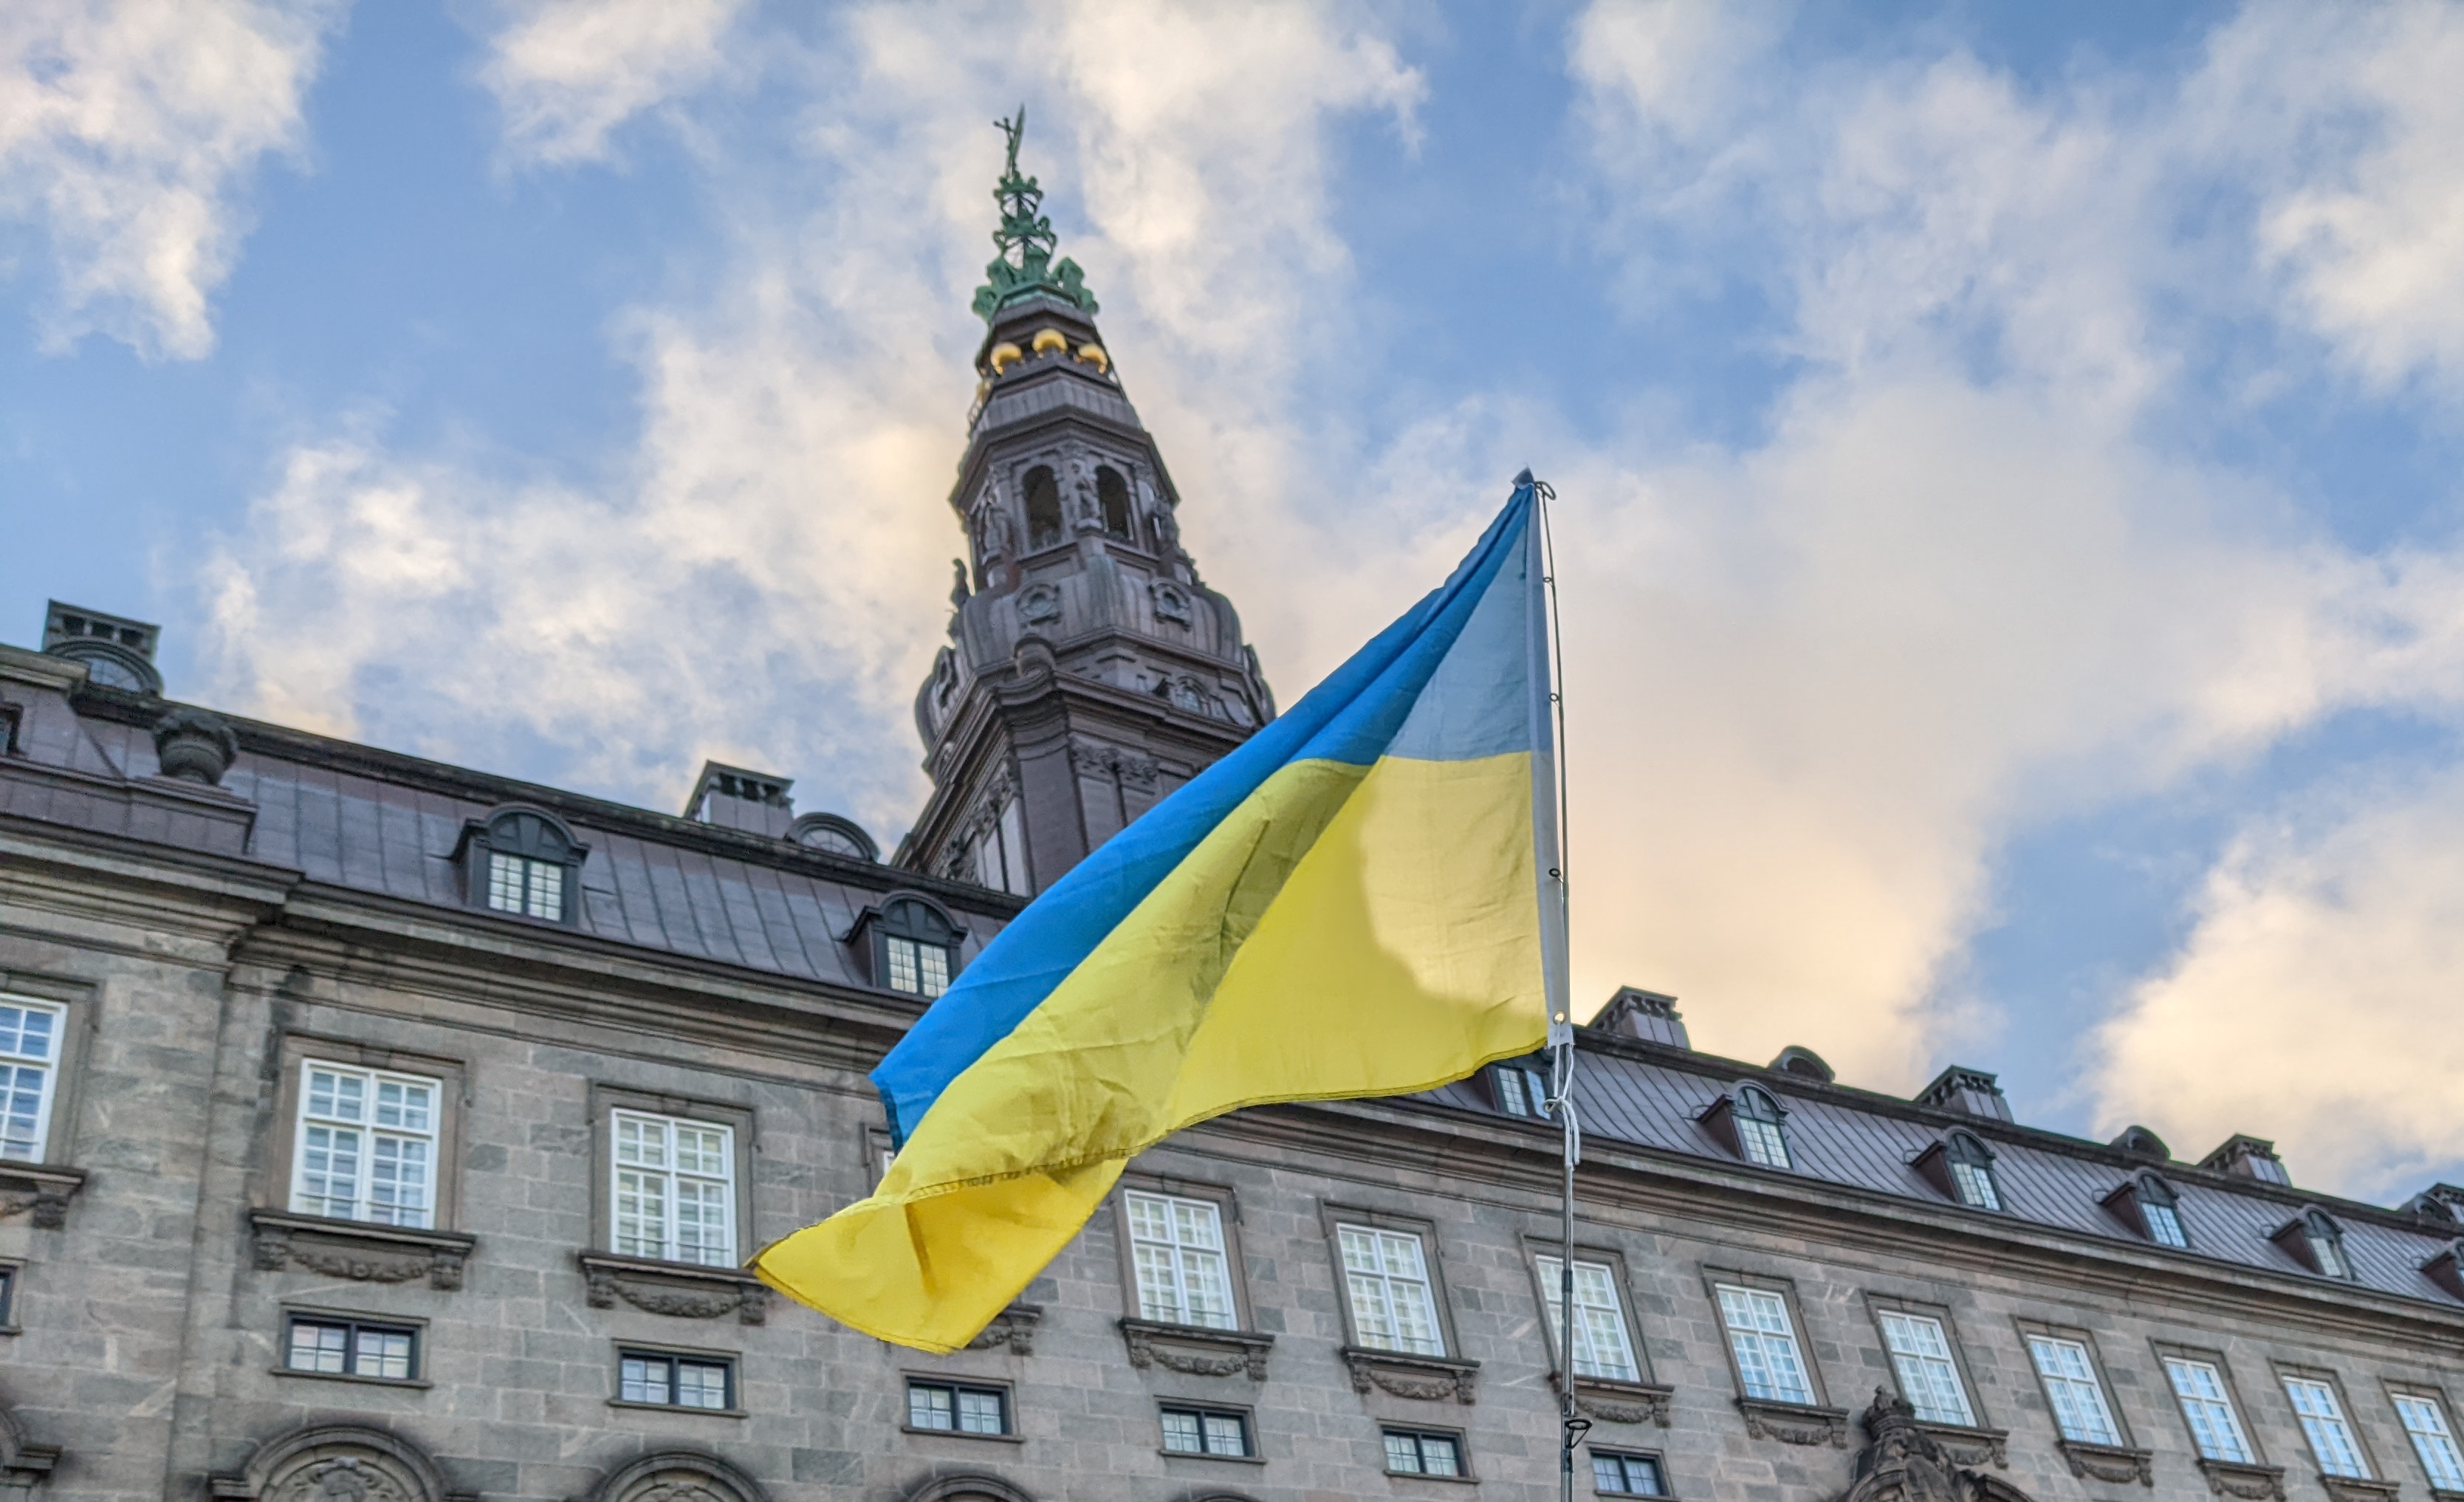 Denmark is making a major new contribution to Ukraine